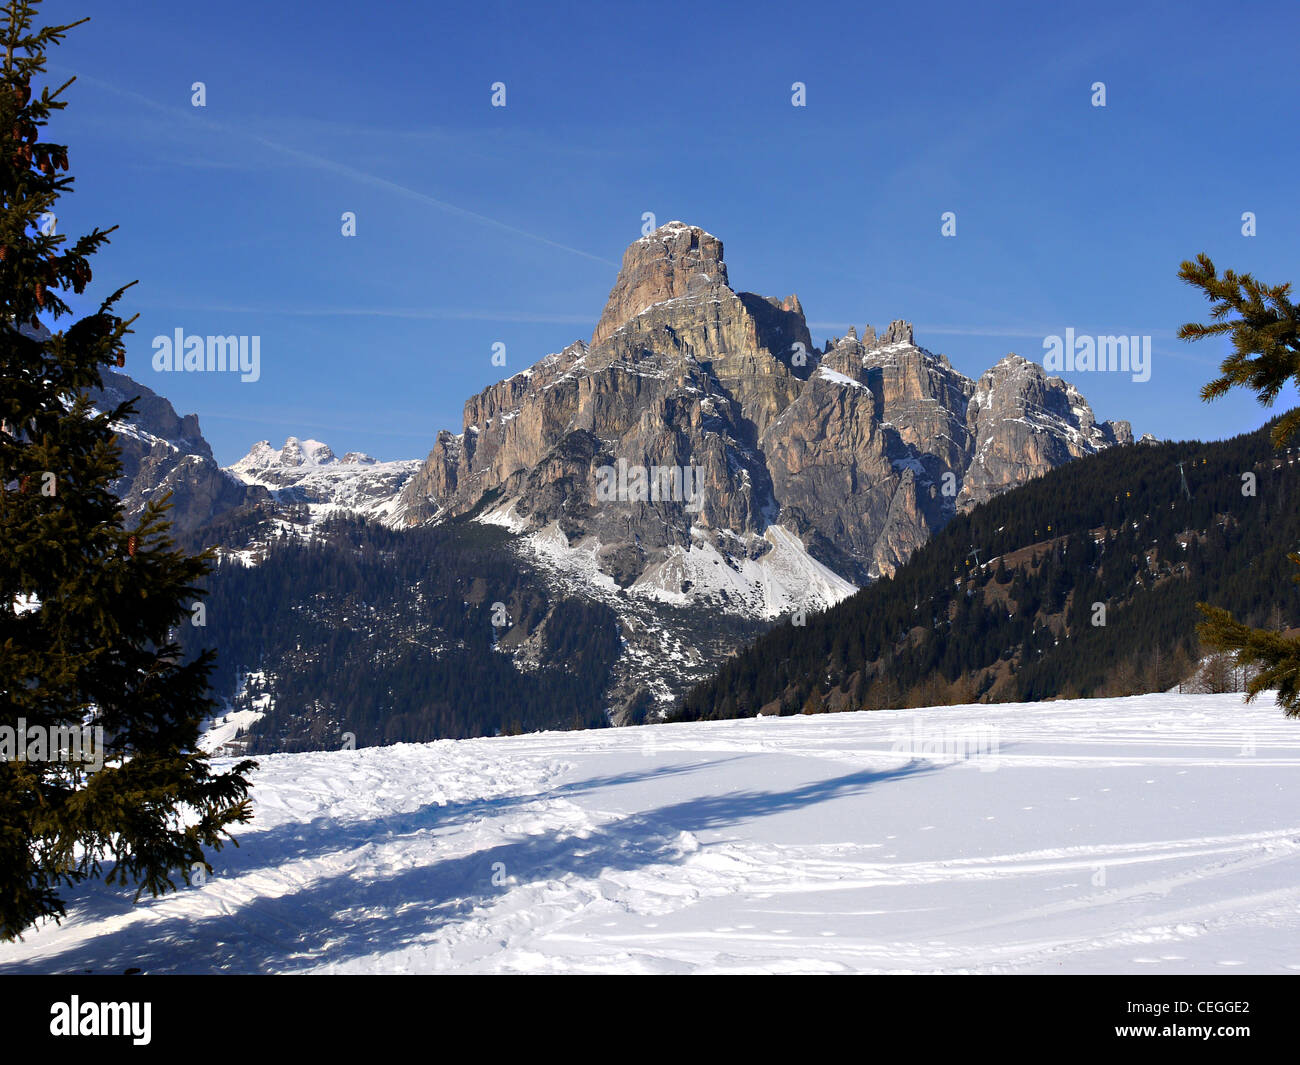 General view of the ski resort Corvara in the Dolomite mountains in ...